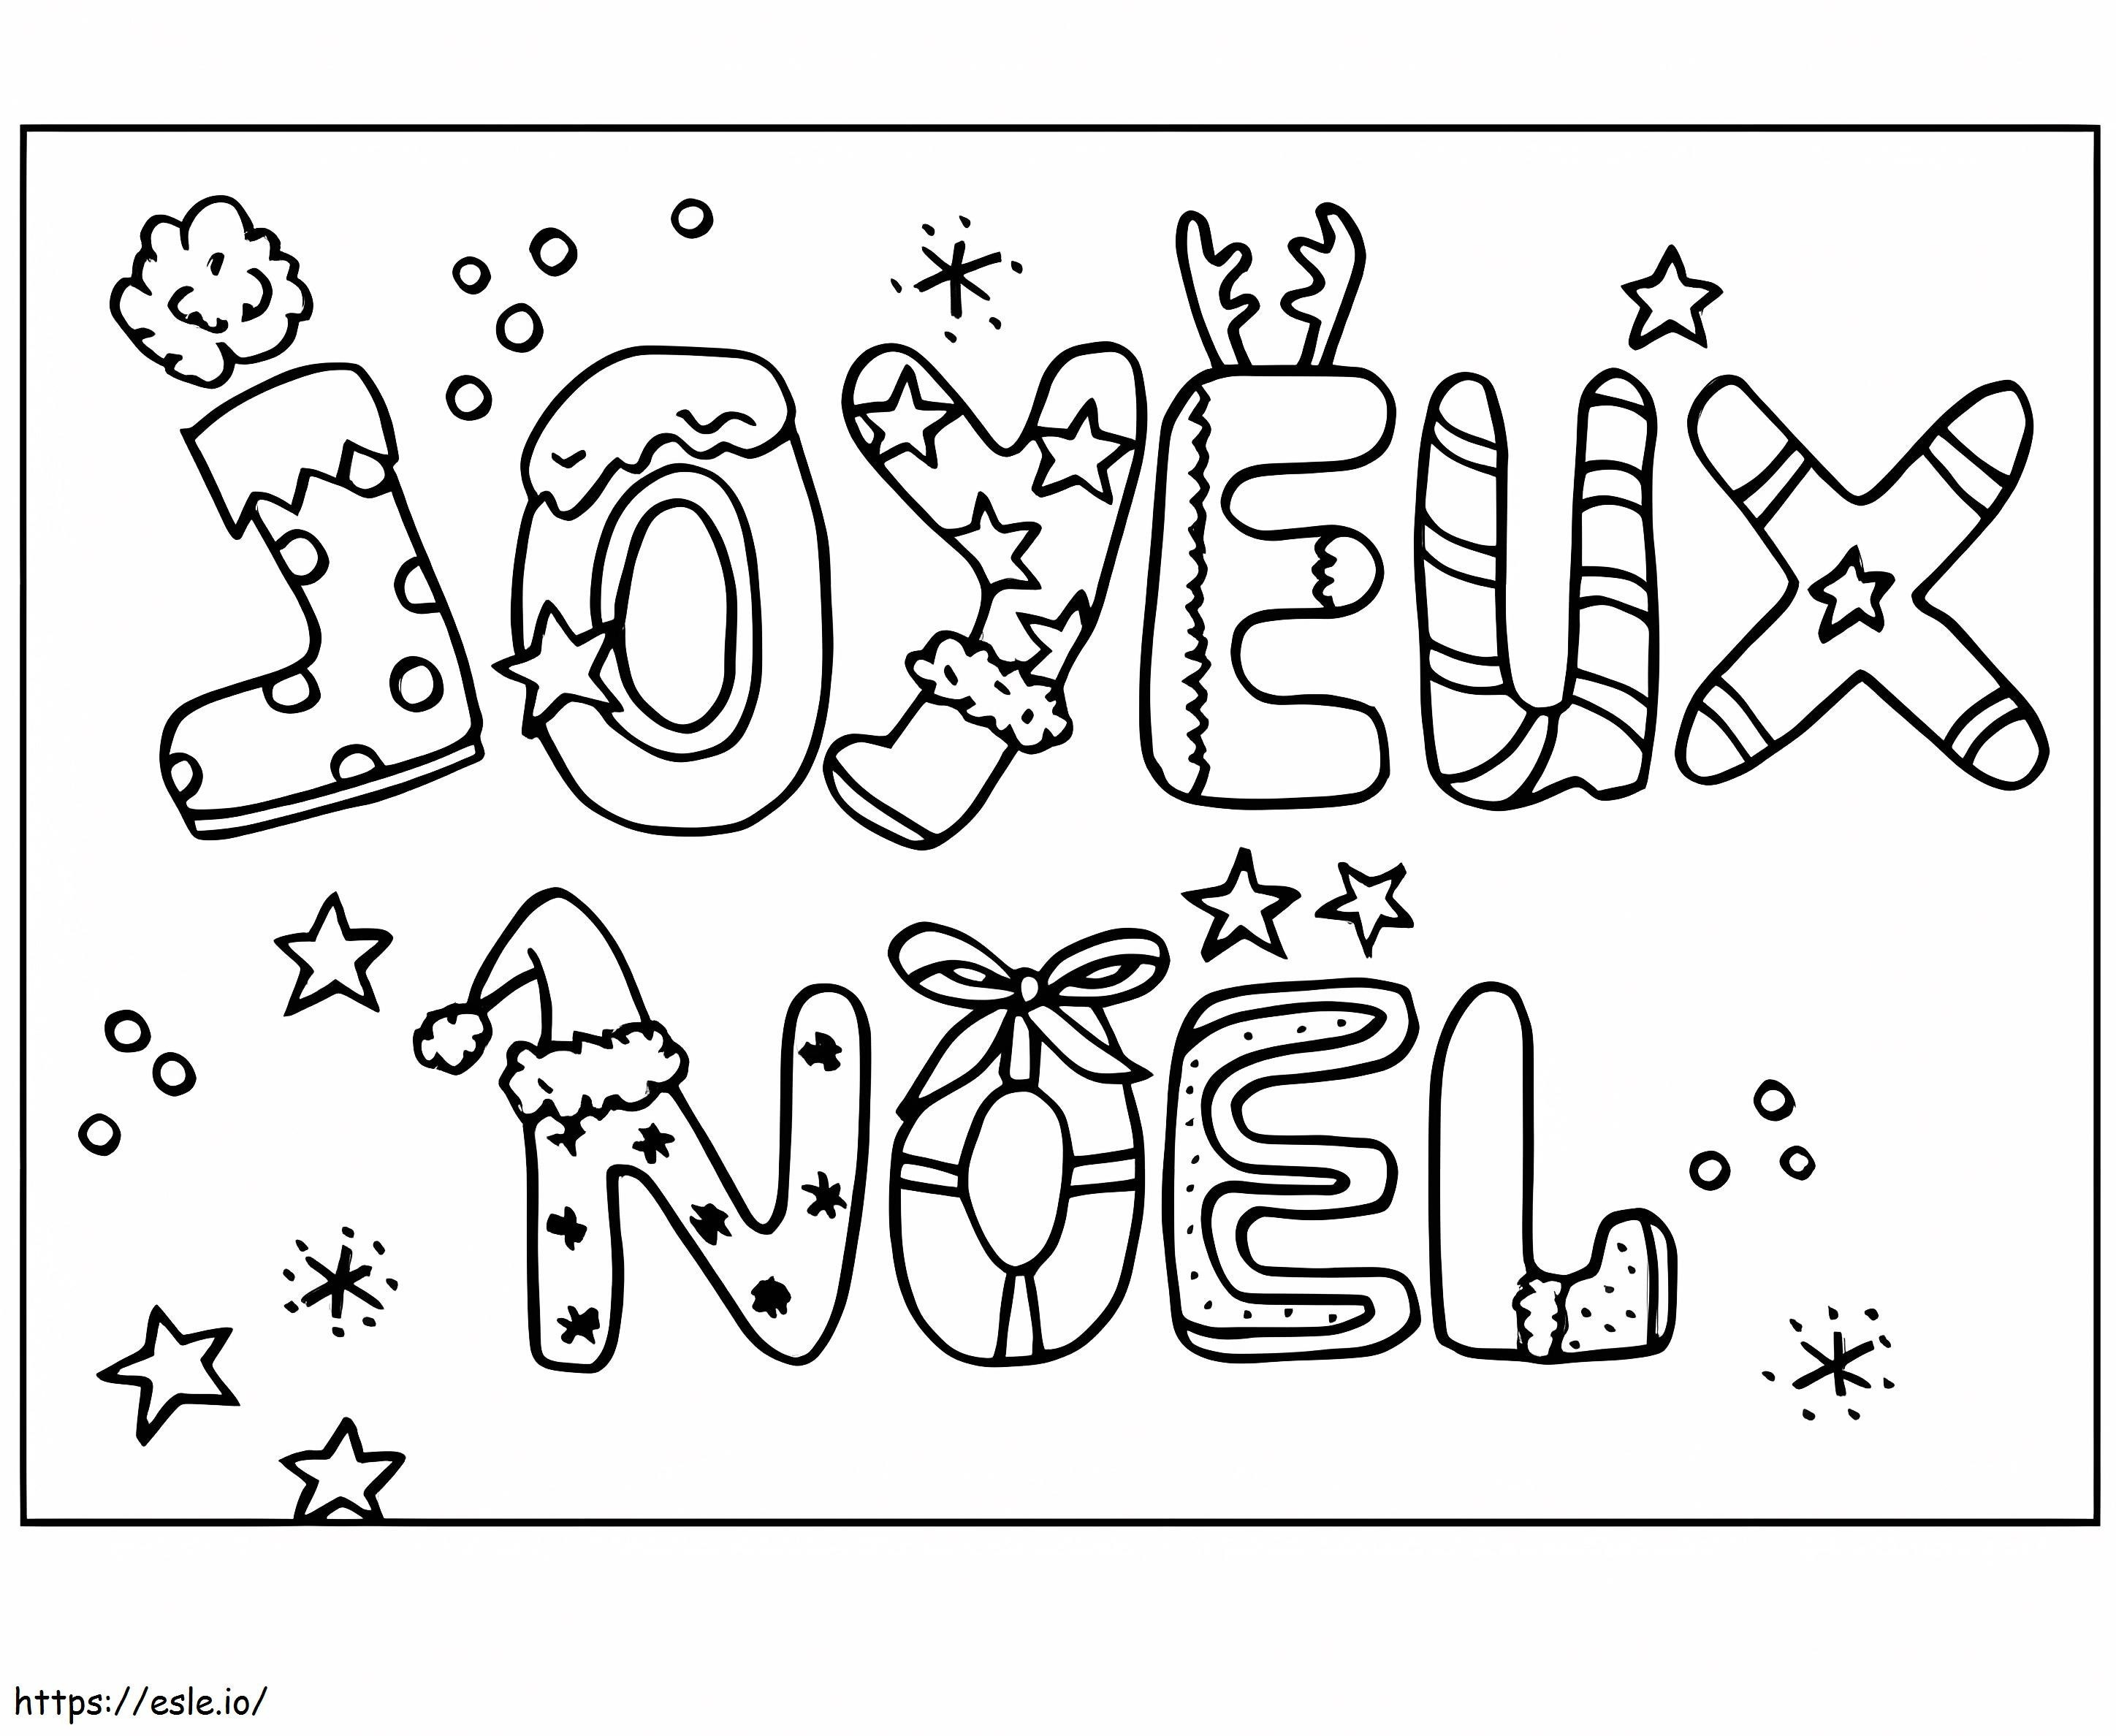 Merry Christmas 10 coloring page